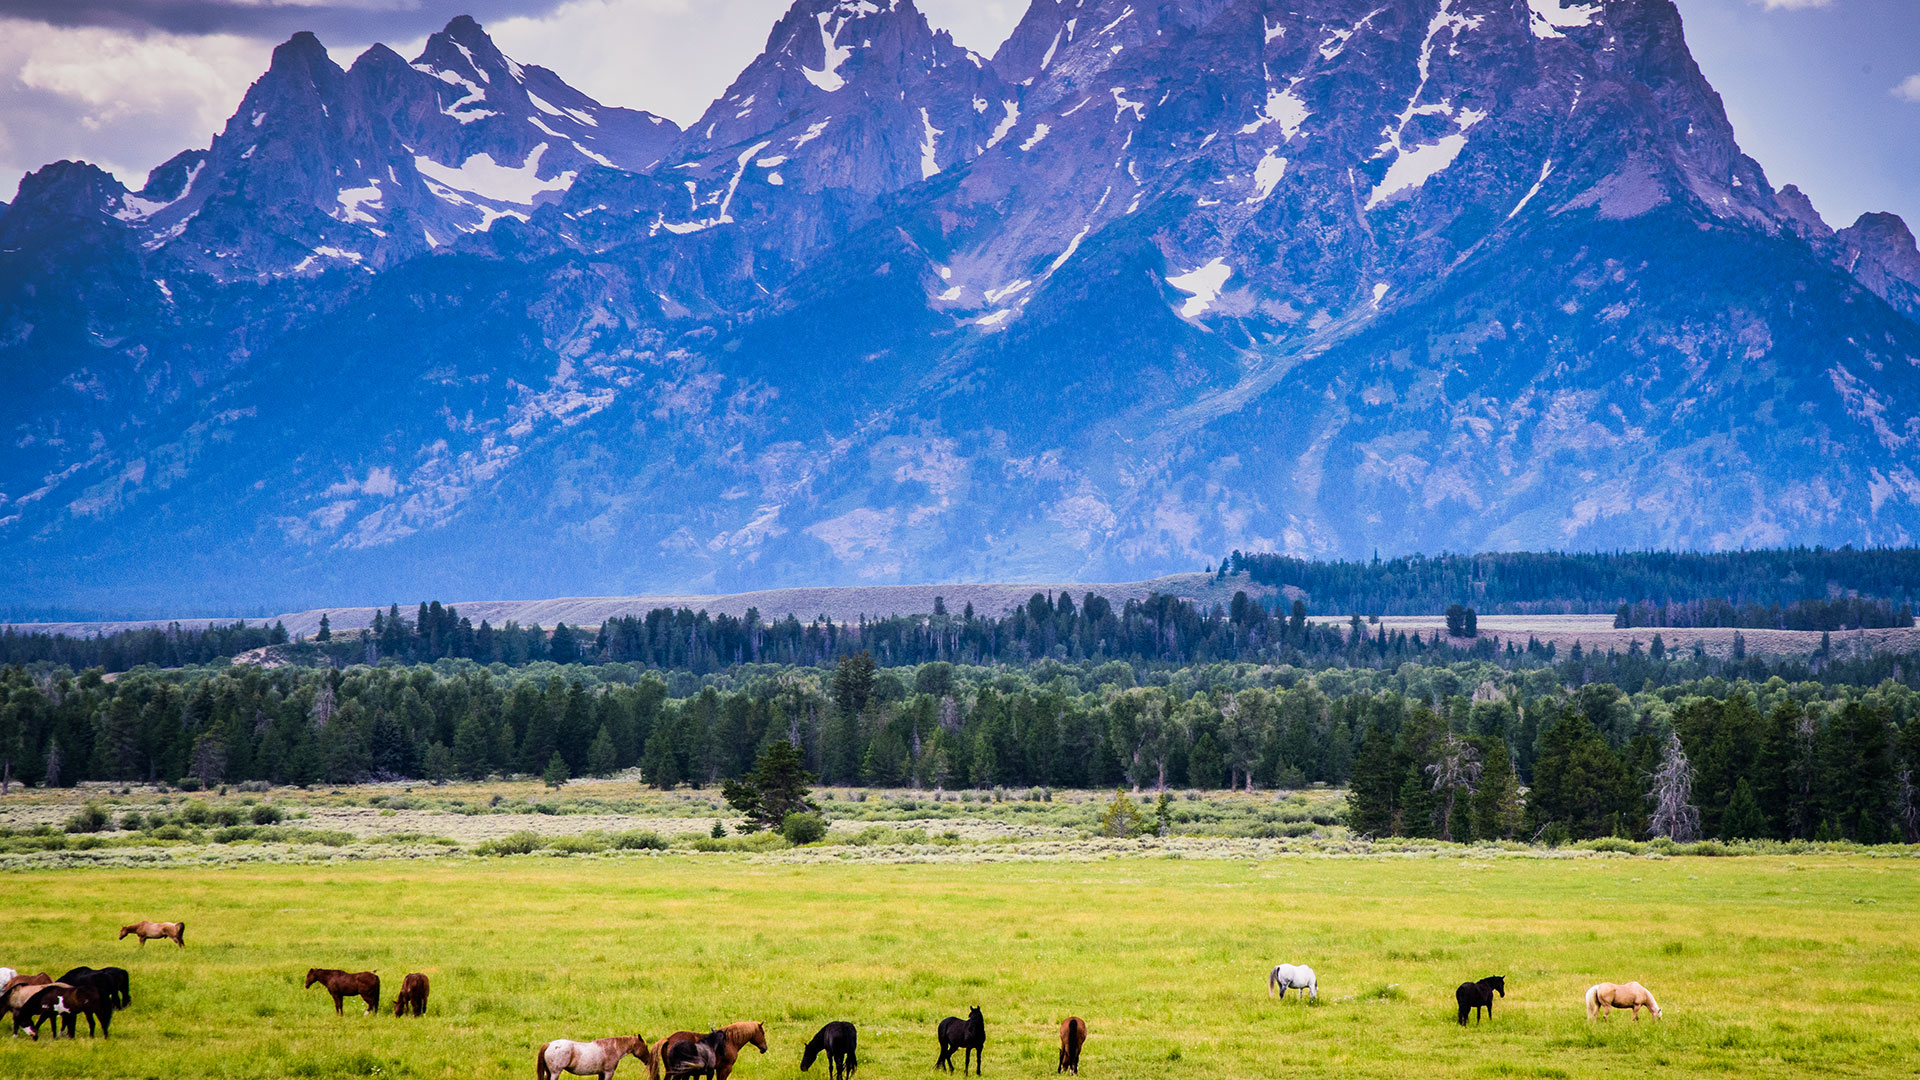 A view of the mighty Tetons from the Triangle X Ranch in Grand Teton National Park.